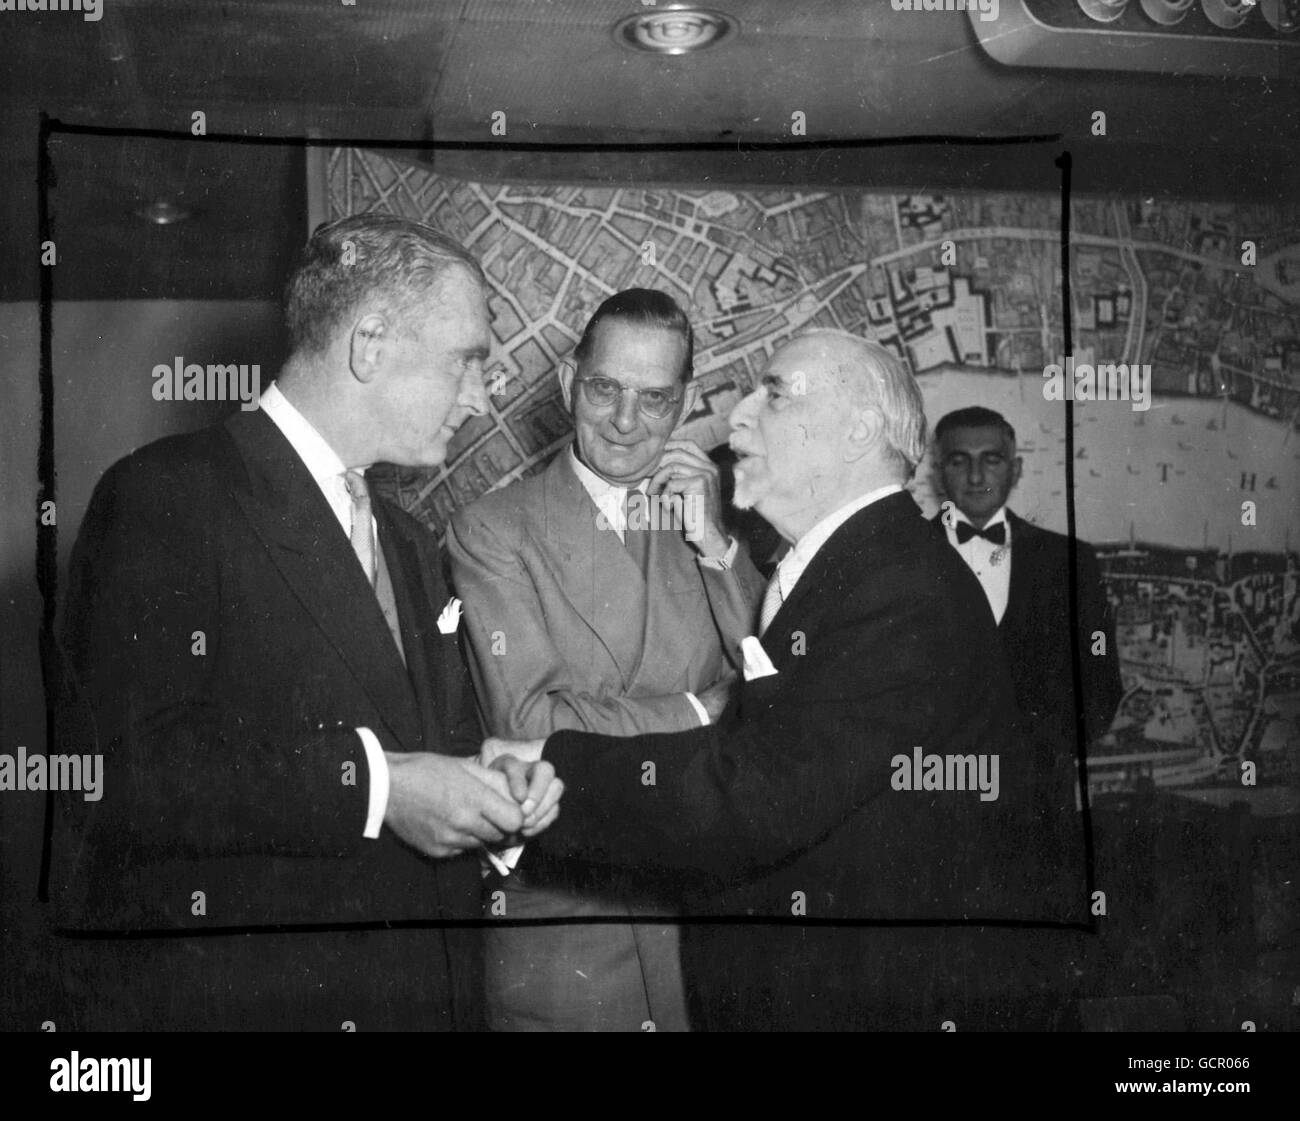 Sir Thomas Beecham, the conductor, has a cordial greeting for Mr. Norman Collins, commercial TV personality (left) at the second International Celebrity Luncheon at the Royal Festival Hall, London on September 27th 1954, centre is Mr. Neville Cardus Stock Photo